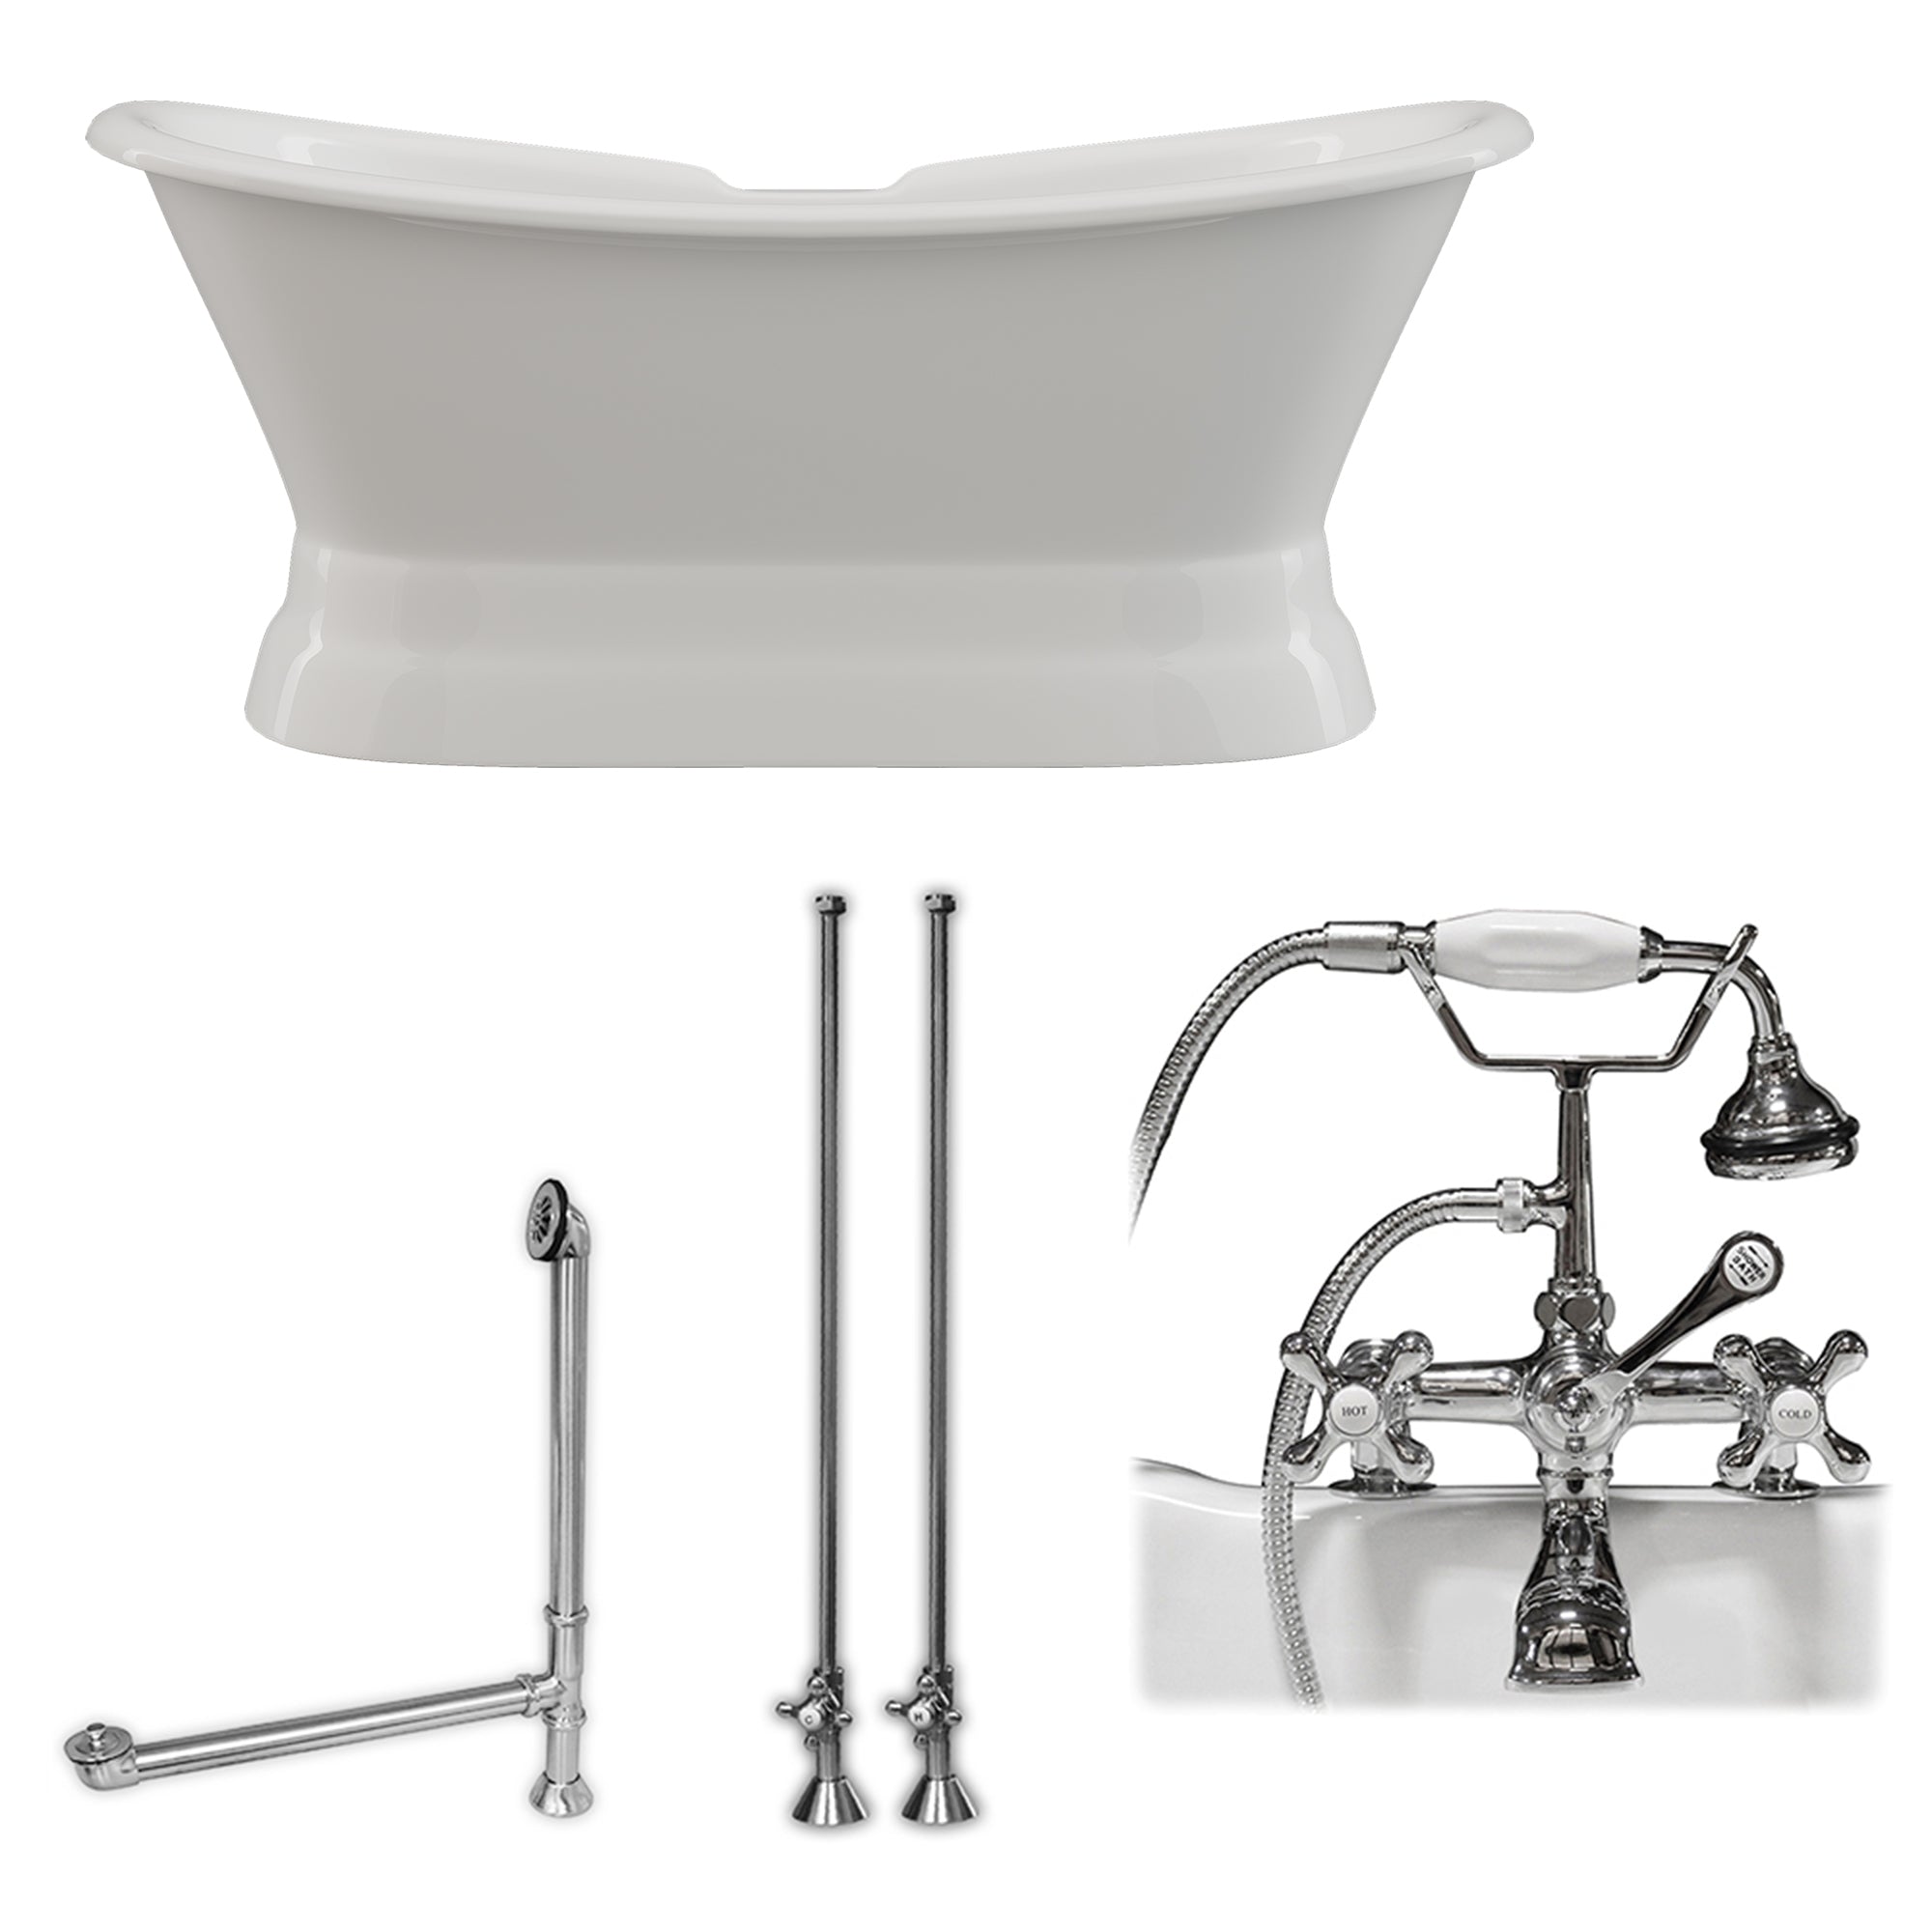 Cambridge Plumbing Double Slipper Cast Iron Soaking Pedestal Tub (Porcelain interior and white paint exterior) and Deck Mount Plumbing Package (Brushed nickel) DES-PED-463D-2-PKG-7DH - Vital Hydrotherapy